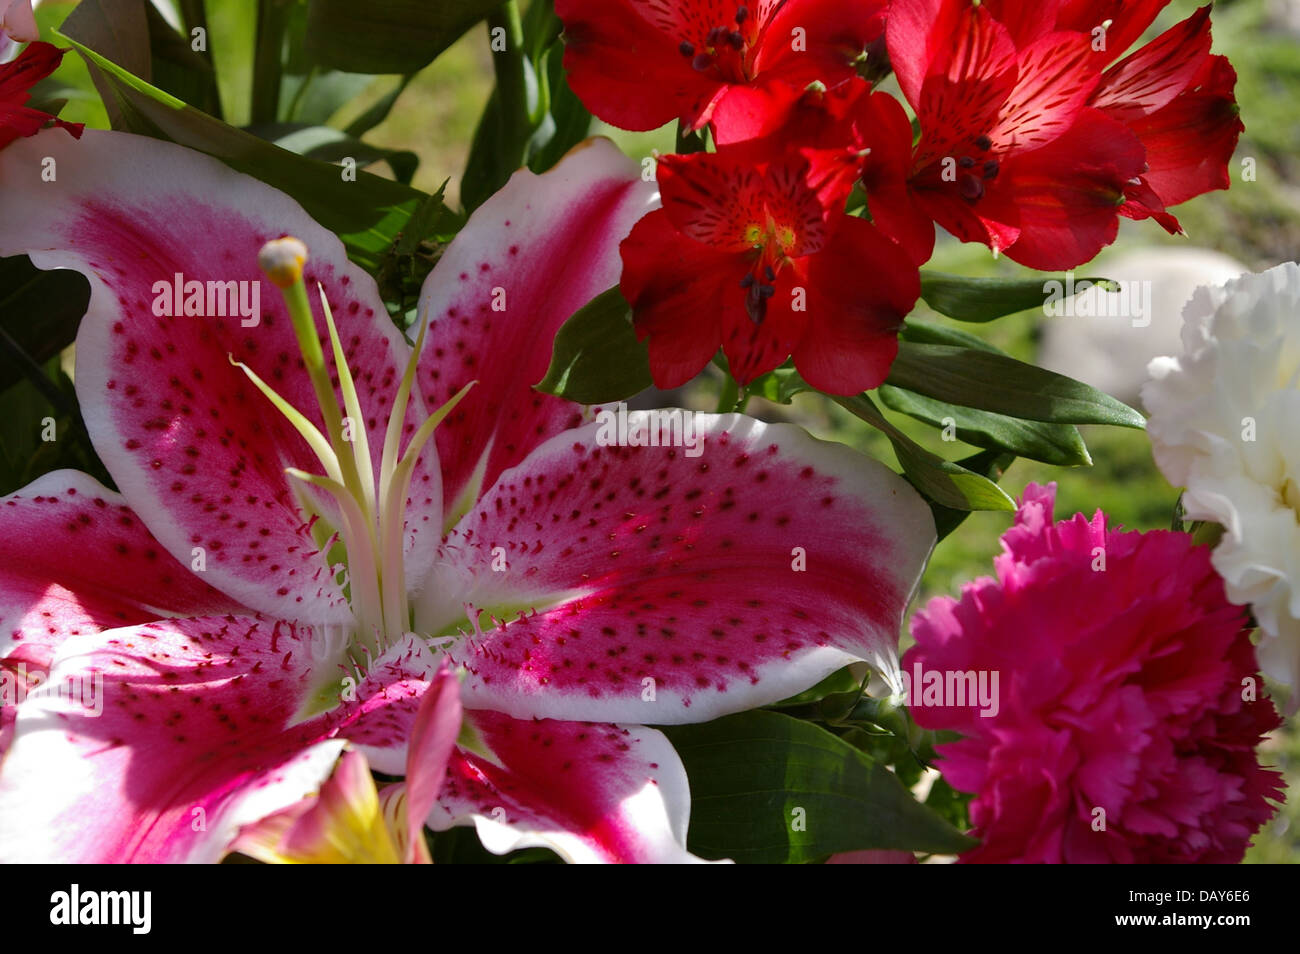 Macro of bouquet of flowers that contain a Star Gazer Lily, carnations, and other flowers. Stock Photo